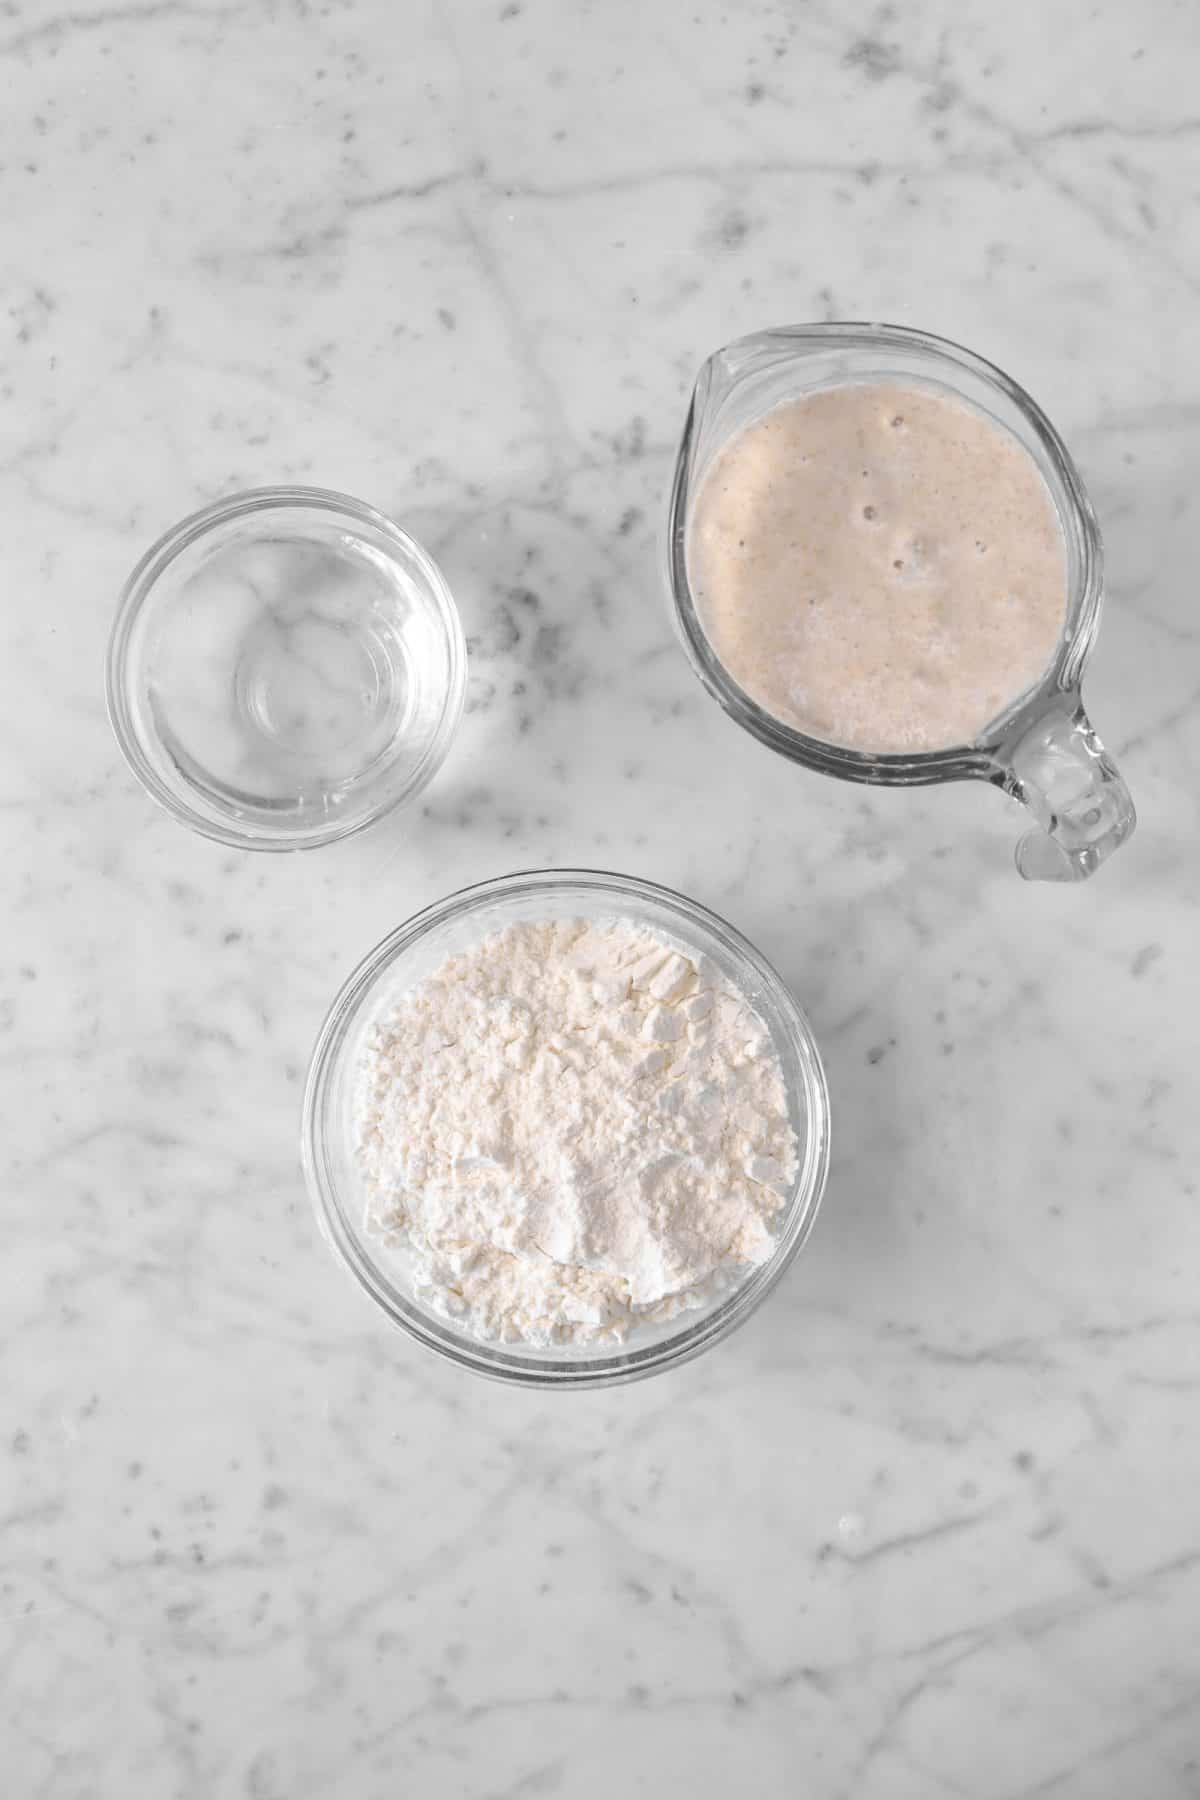 sourdough starter, flour, and water on a marble counter